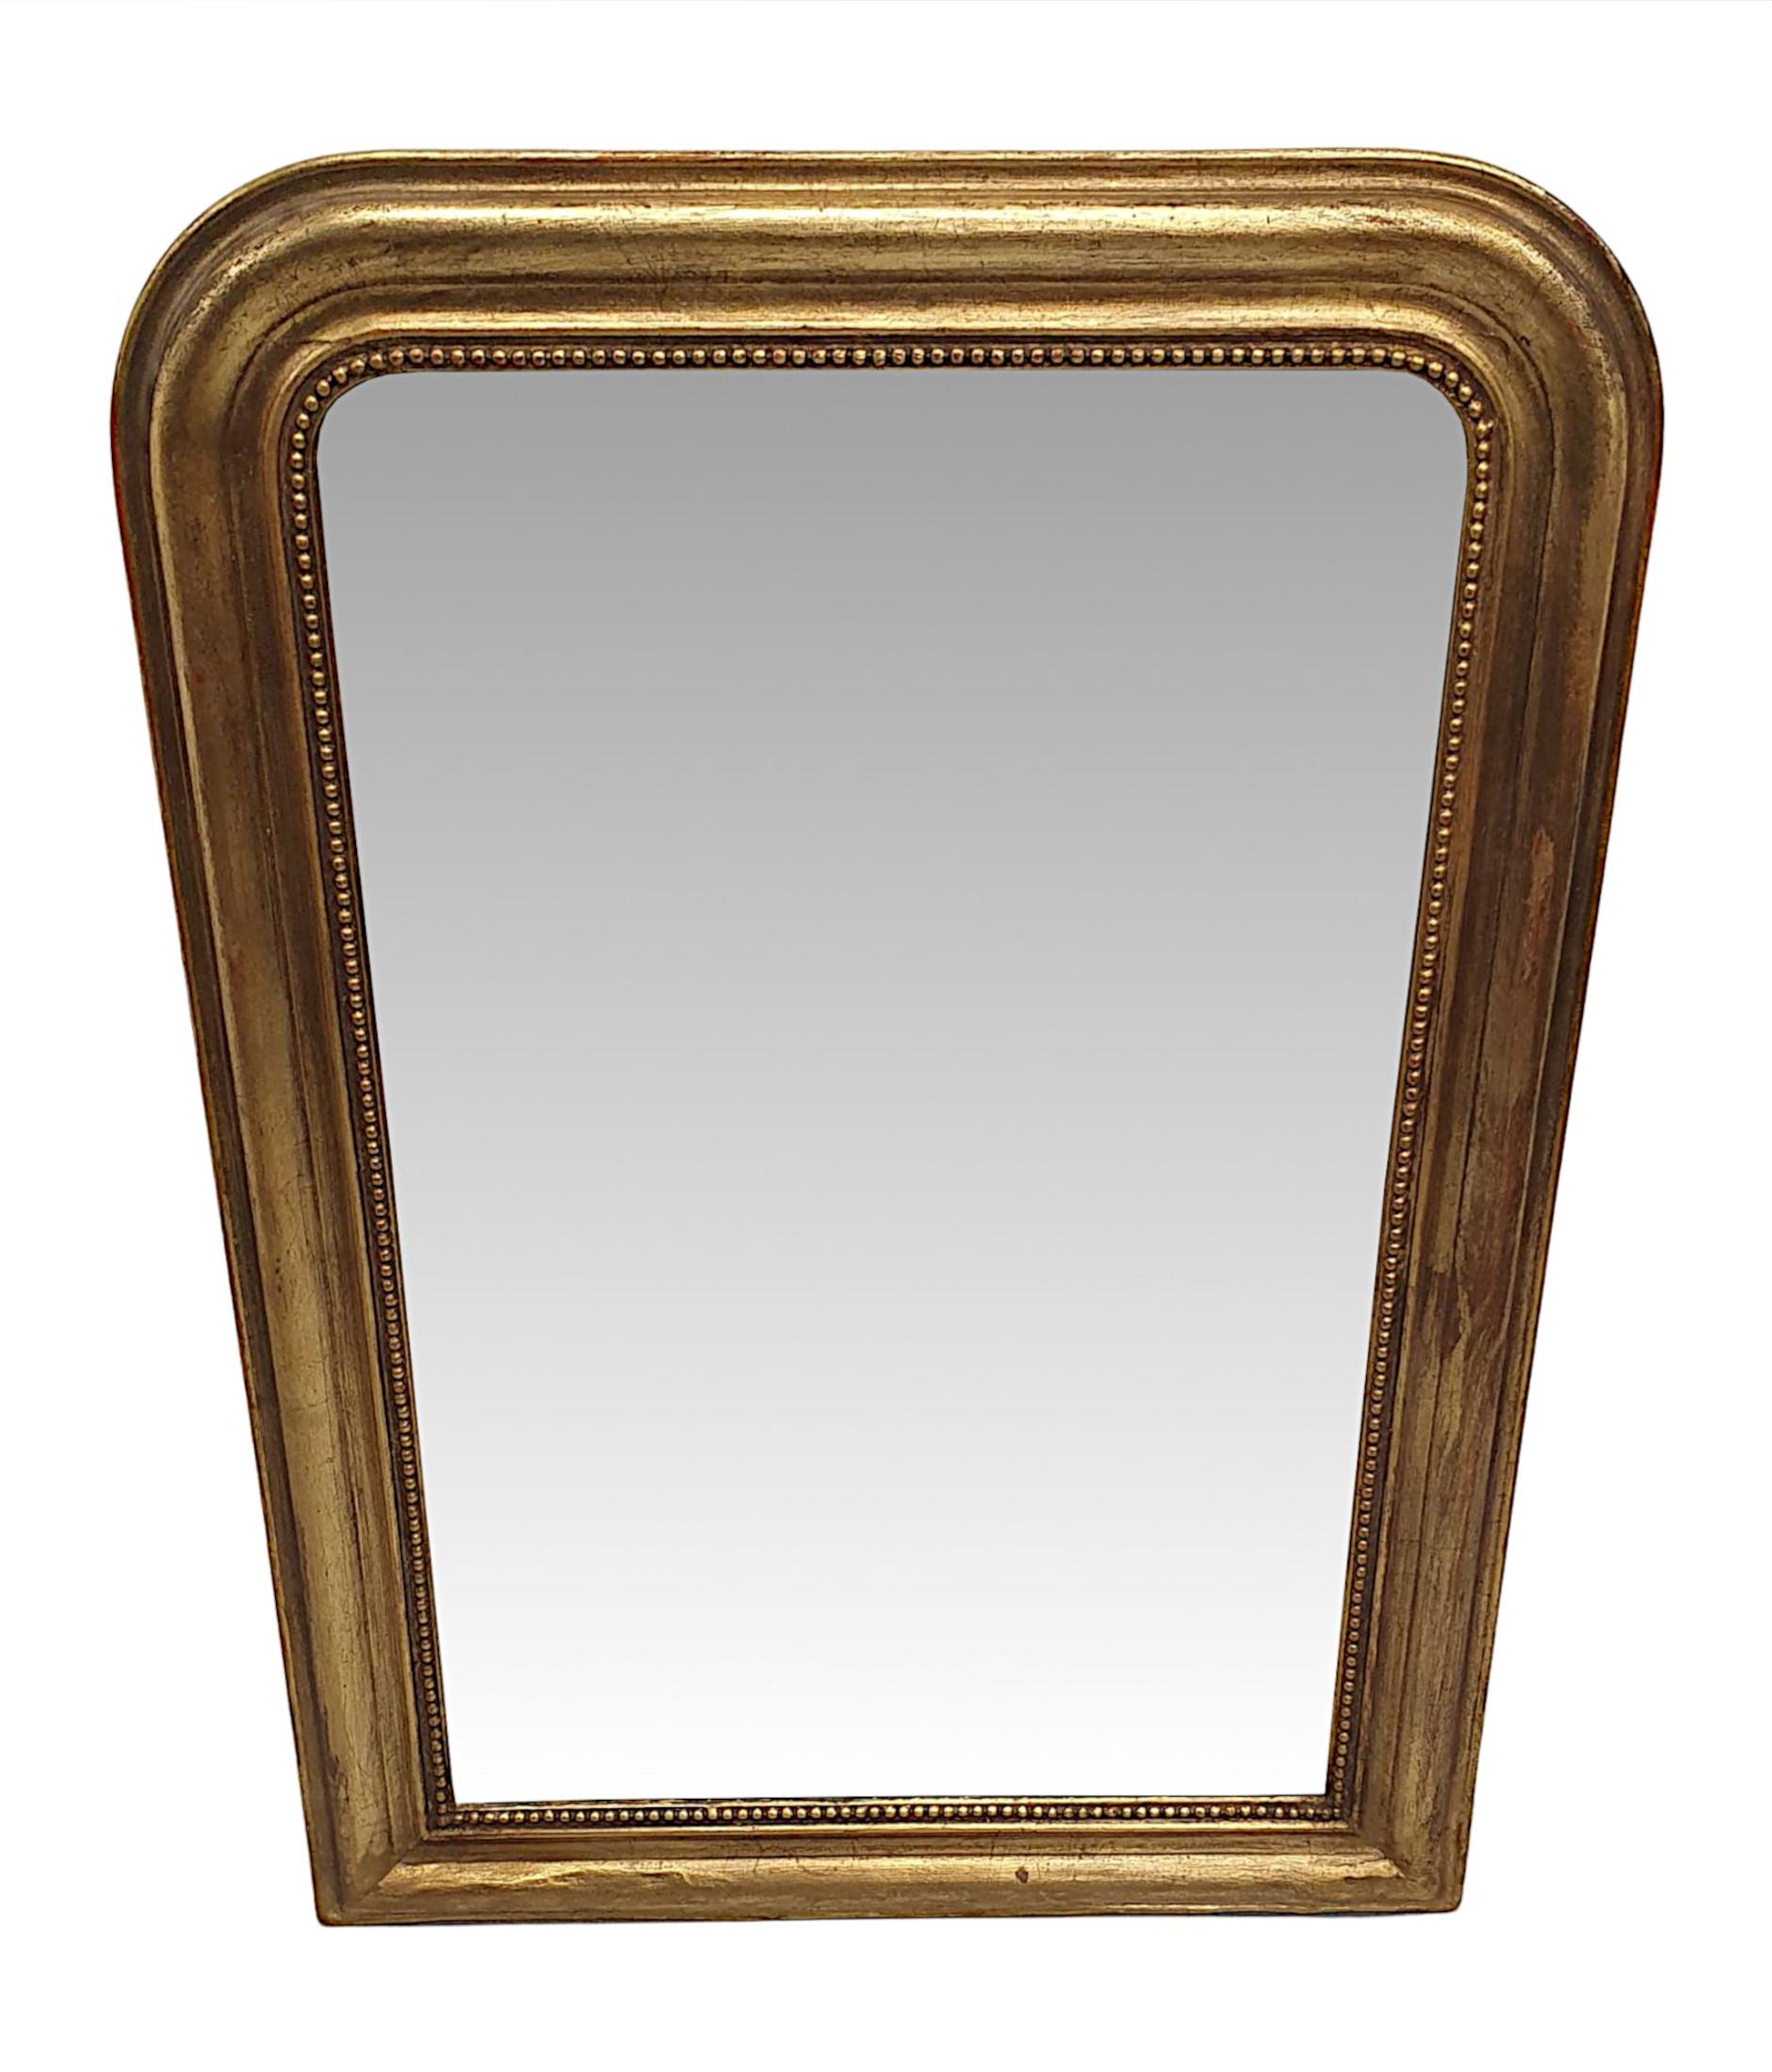 Lovely 19th Century Giltwood Hall or Bathroom Mirror In Good Condition For Sale In Dublin, IE